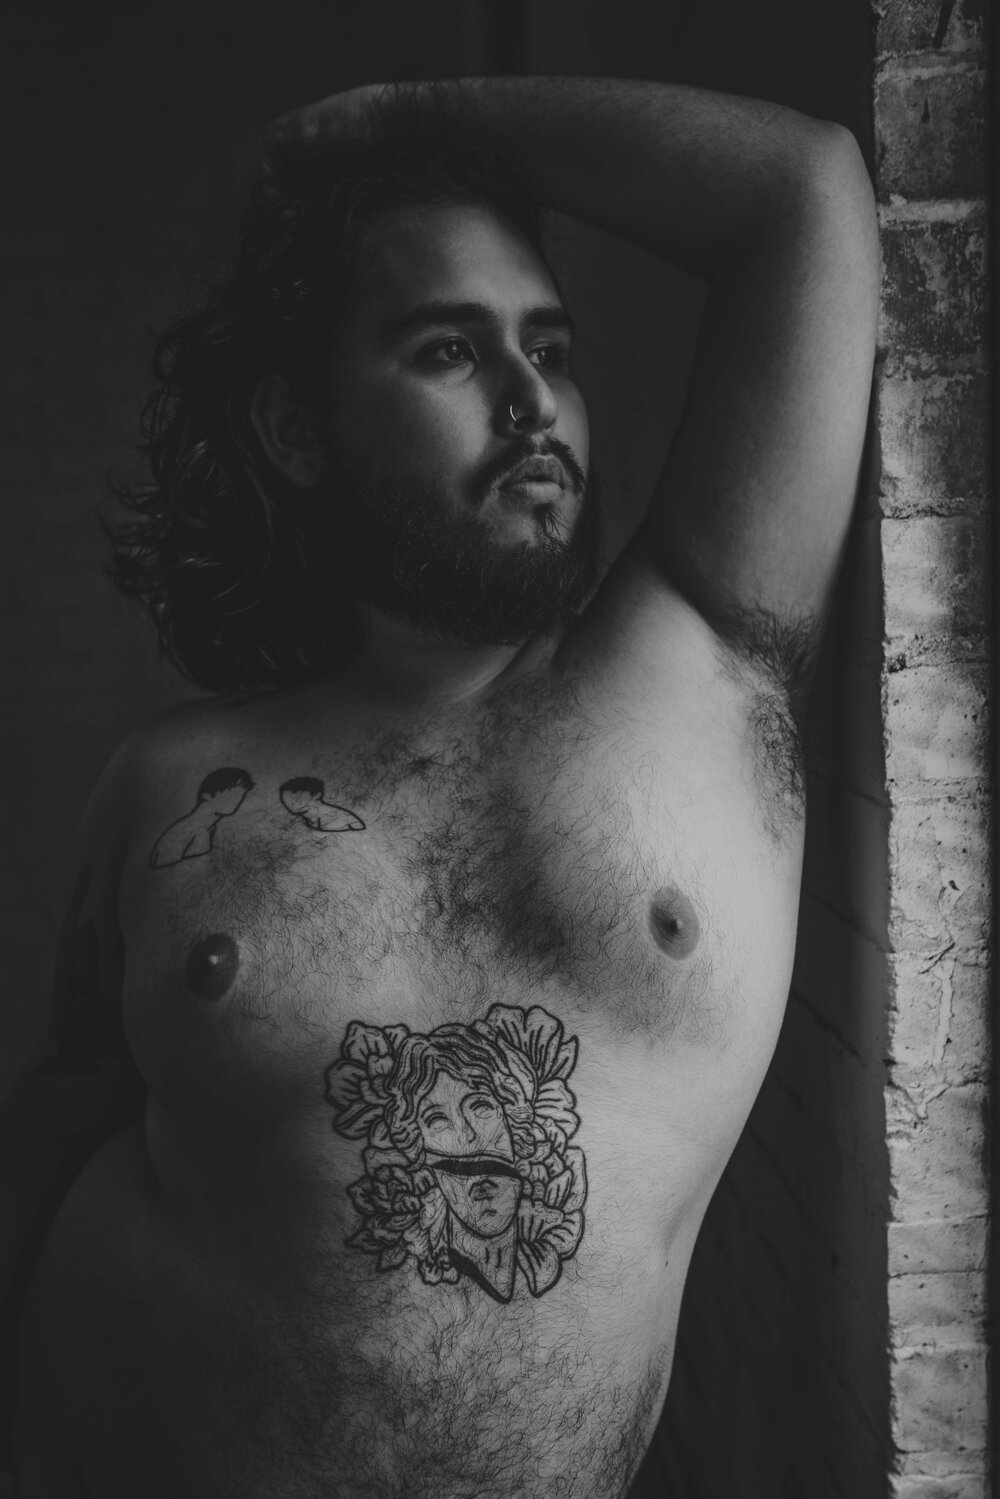 Oklahoma City Male Boudoir black and white portrait of bearded shirtless man with tattoos leaning against brick wall